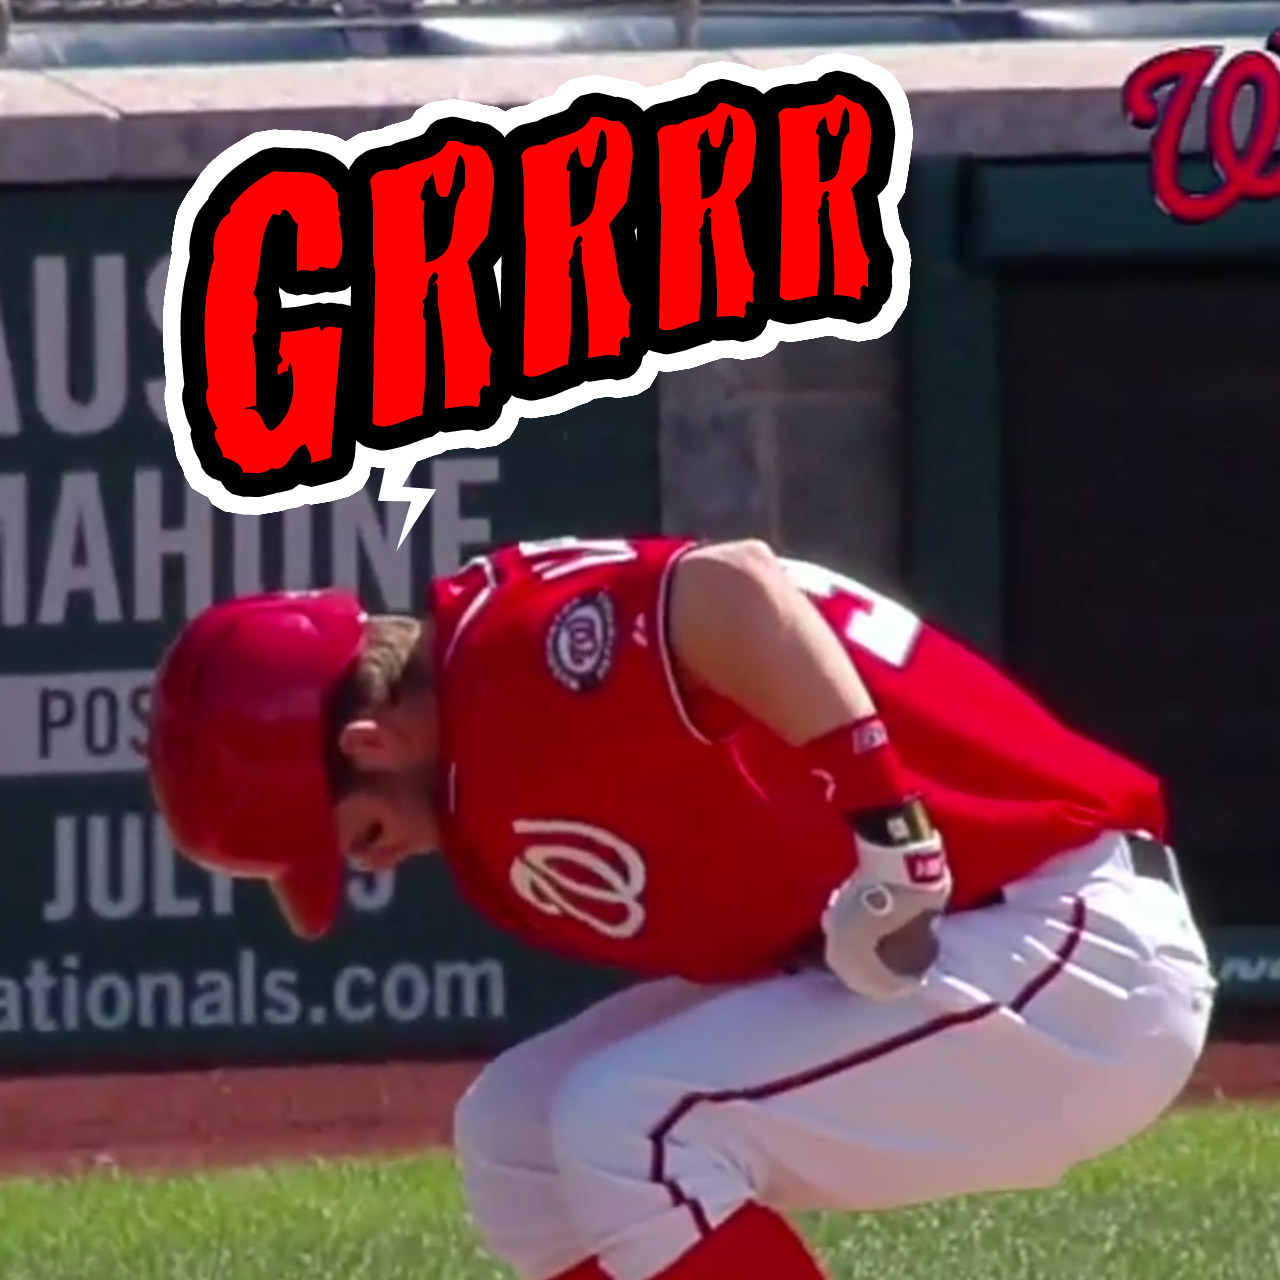 Bryce Harper fails to break his bat after a frustrating plate appearance